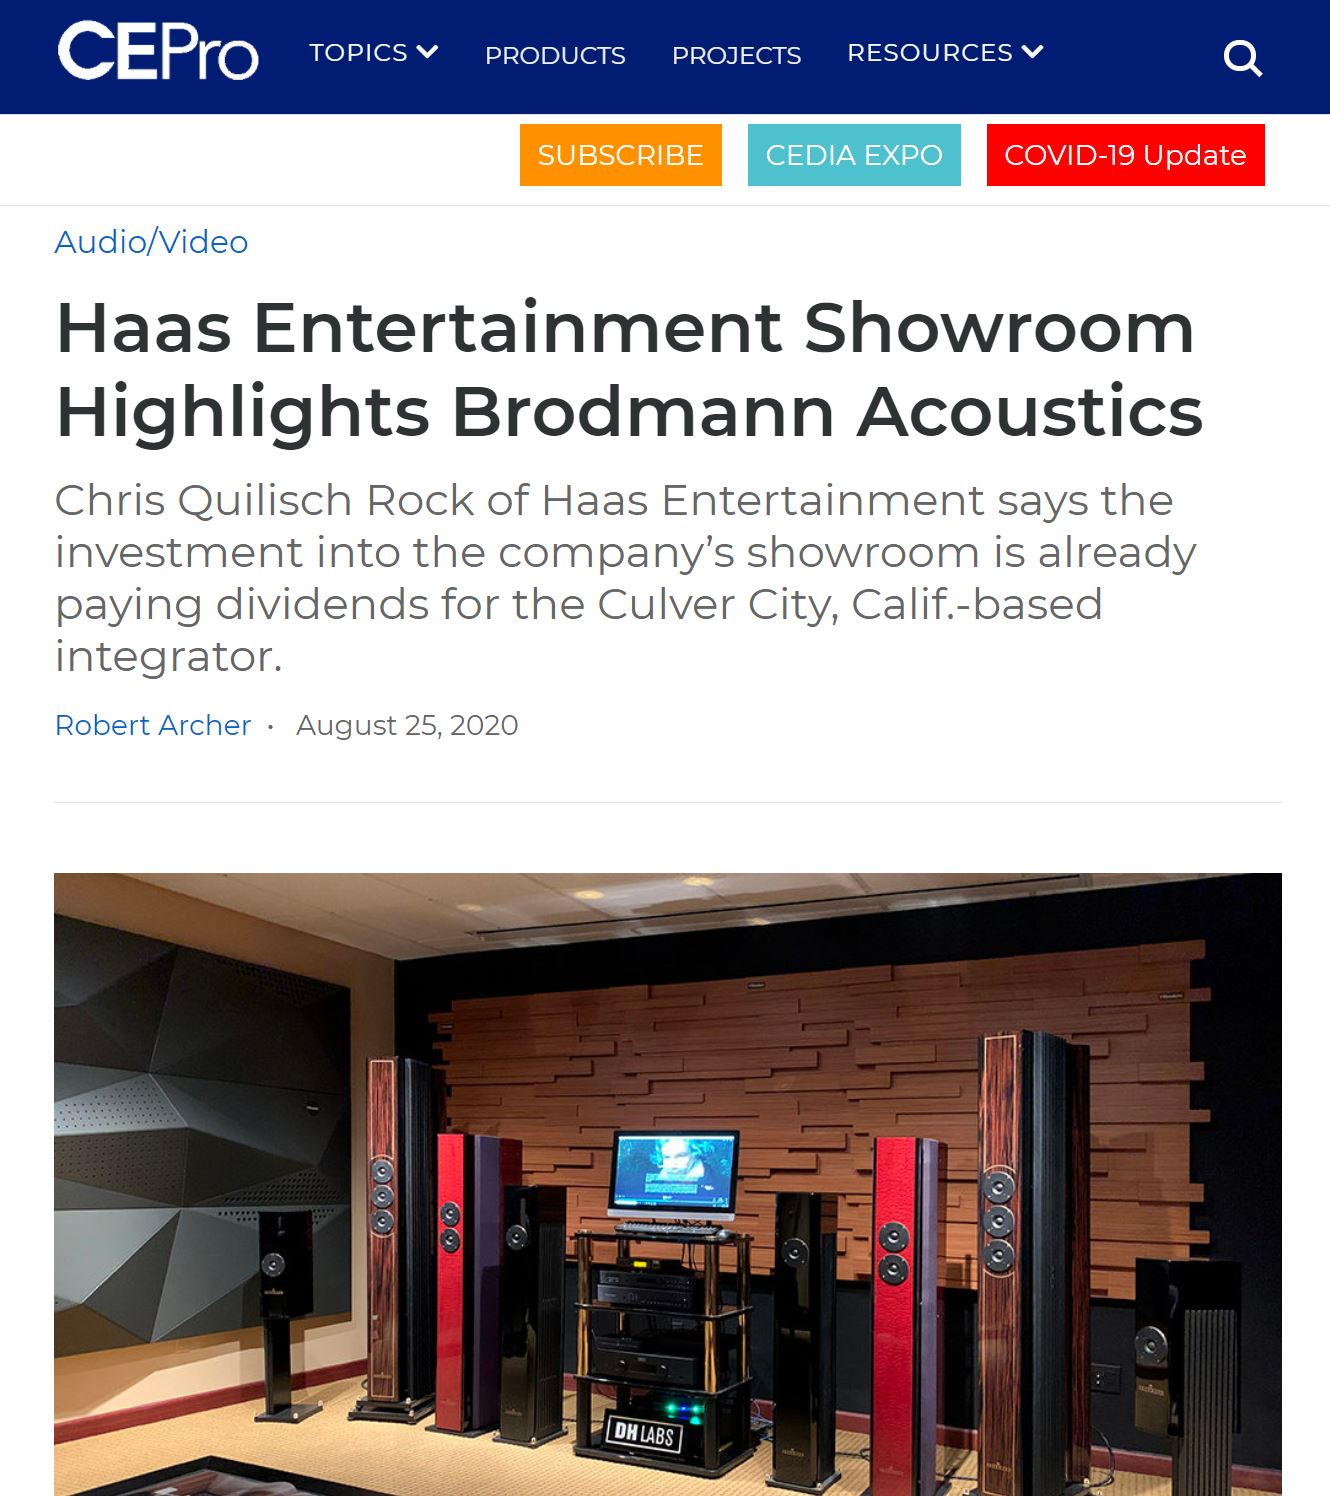 Haas Entertainment mentioned in CEPro Magazine